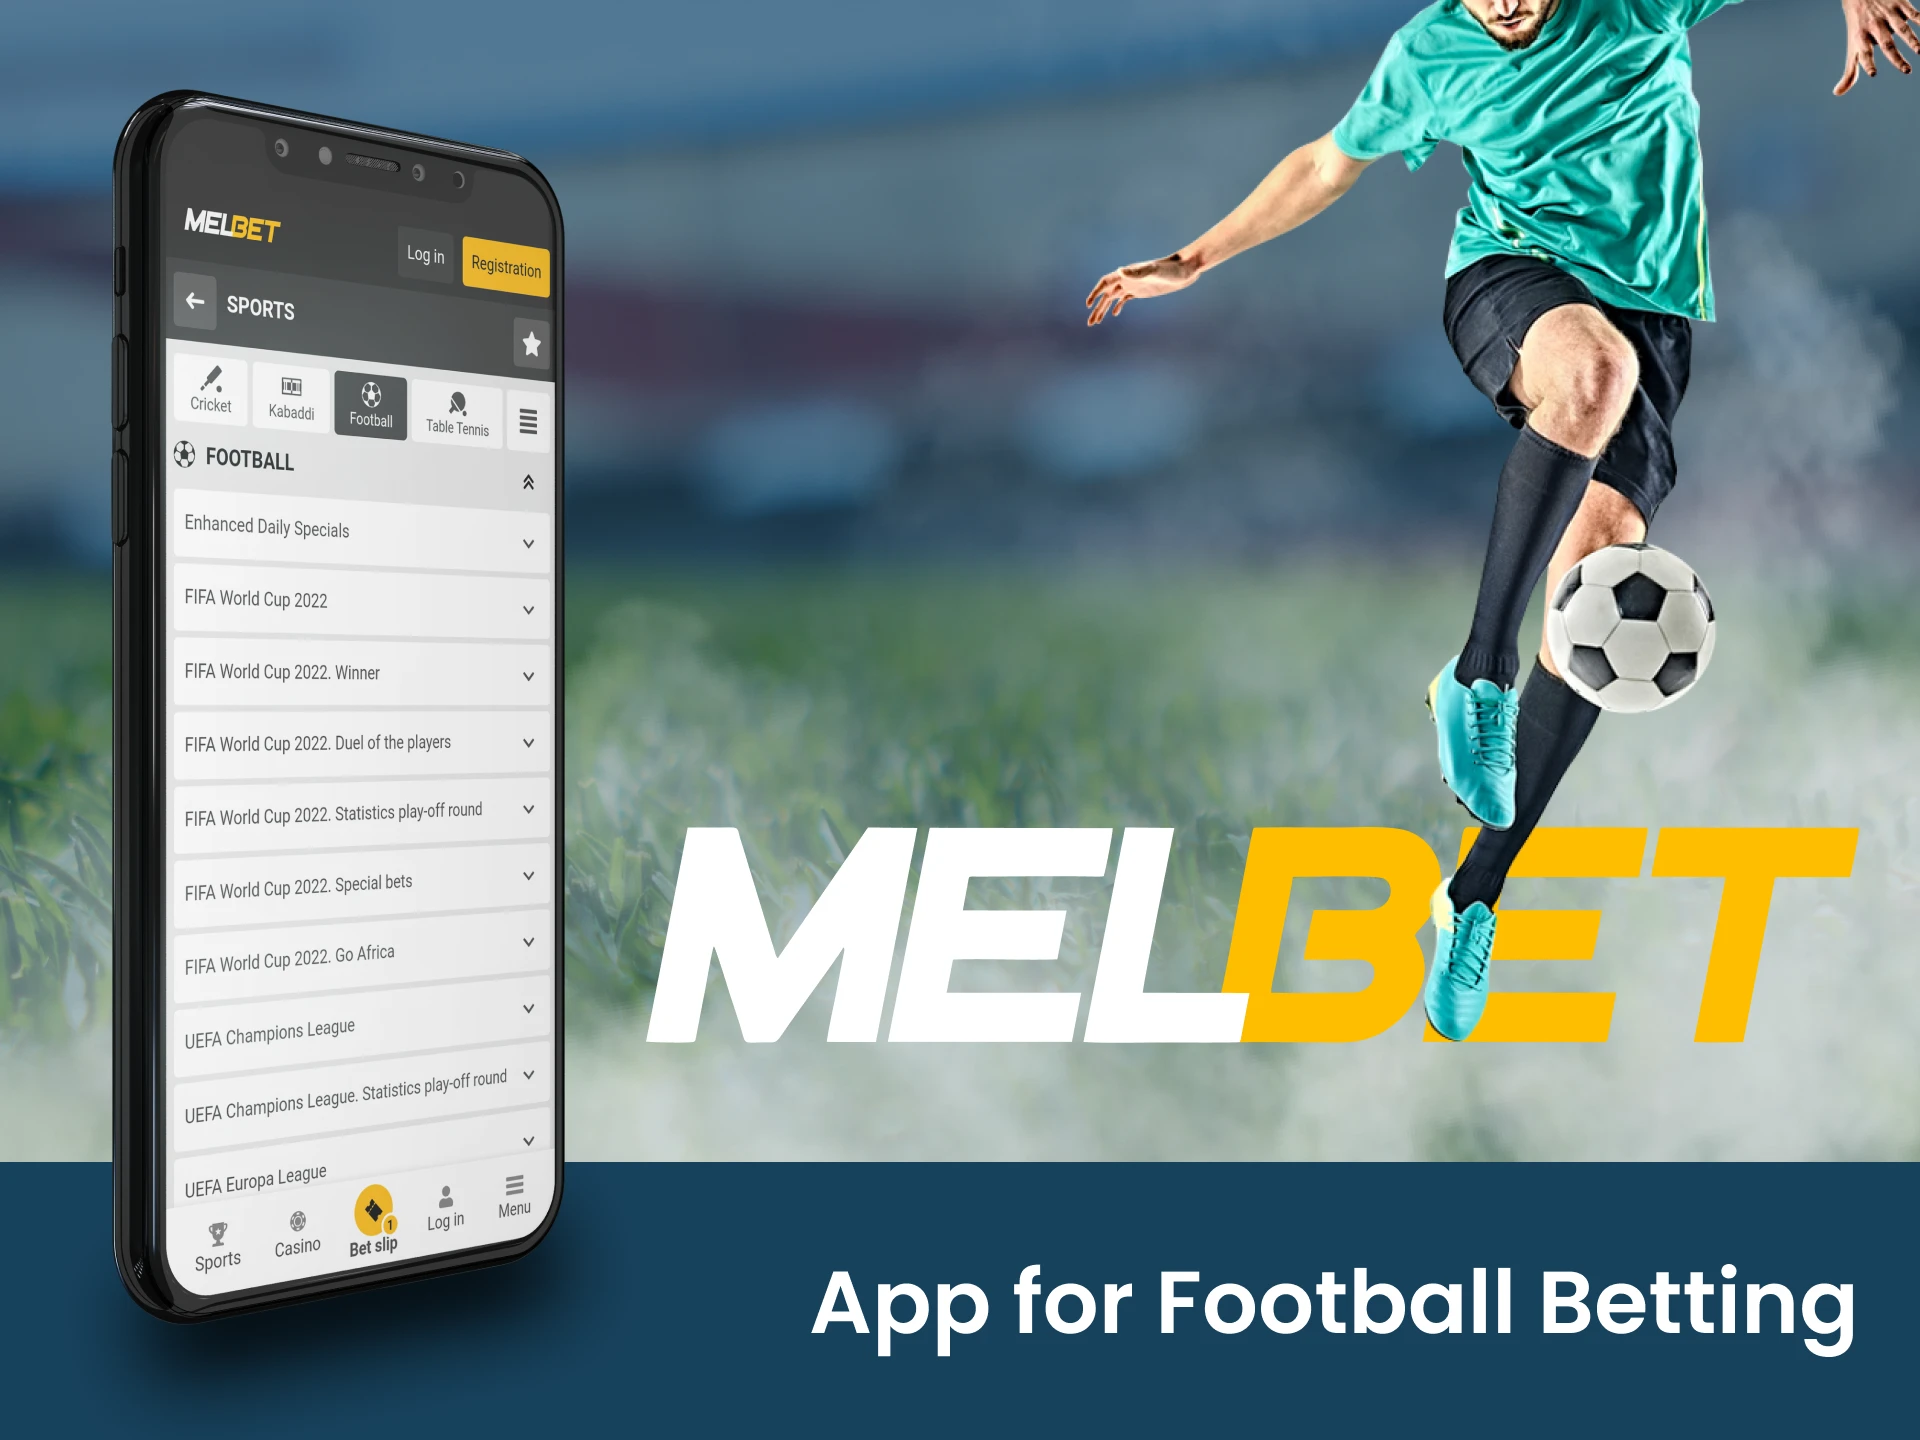 Melbet has the great mobile app for football betting.